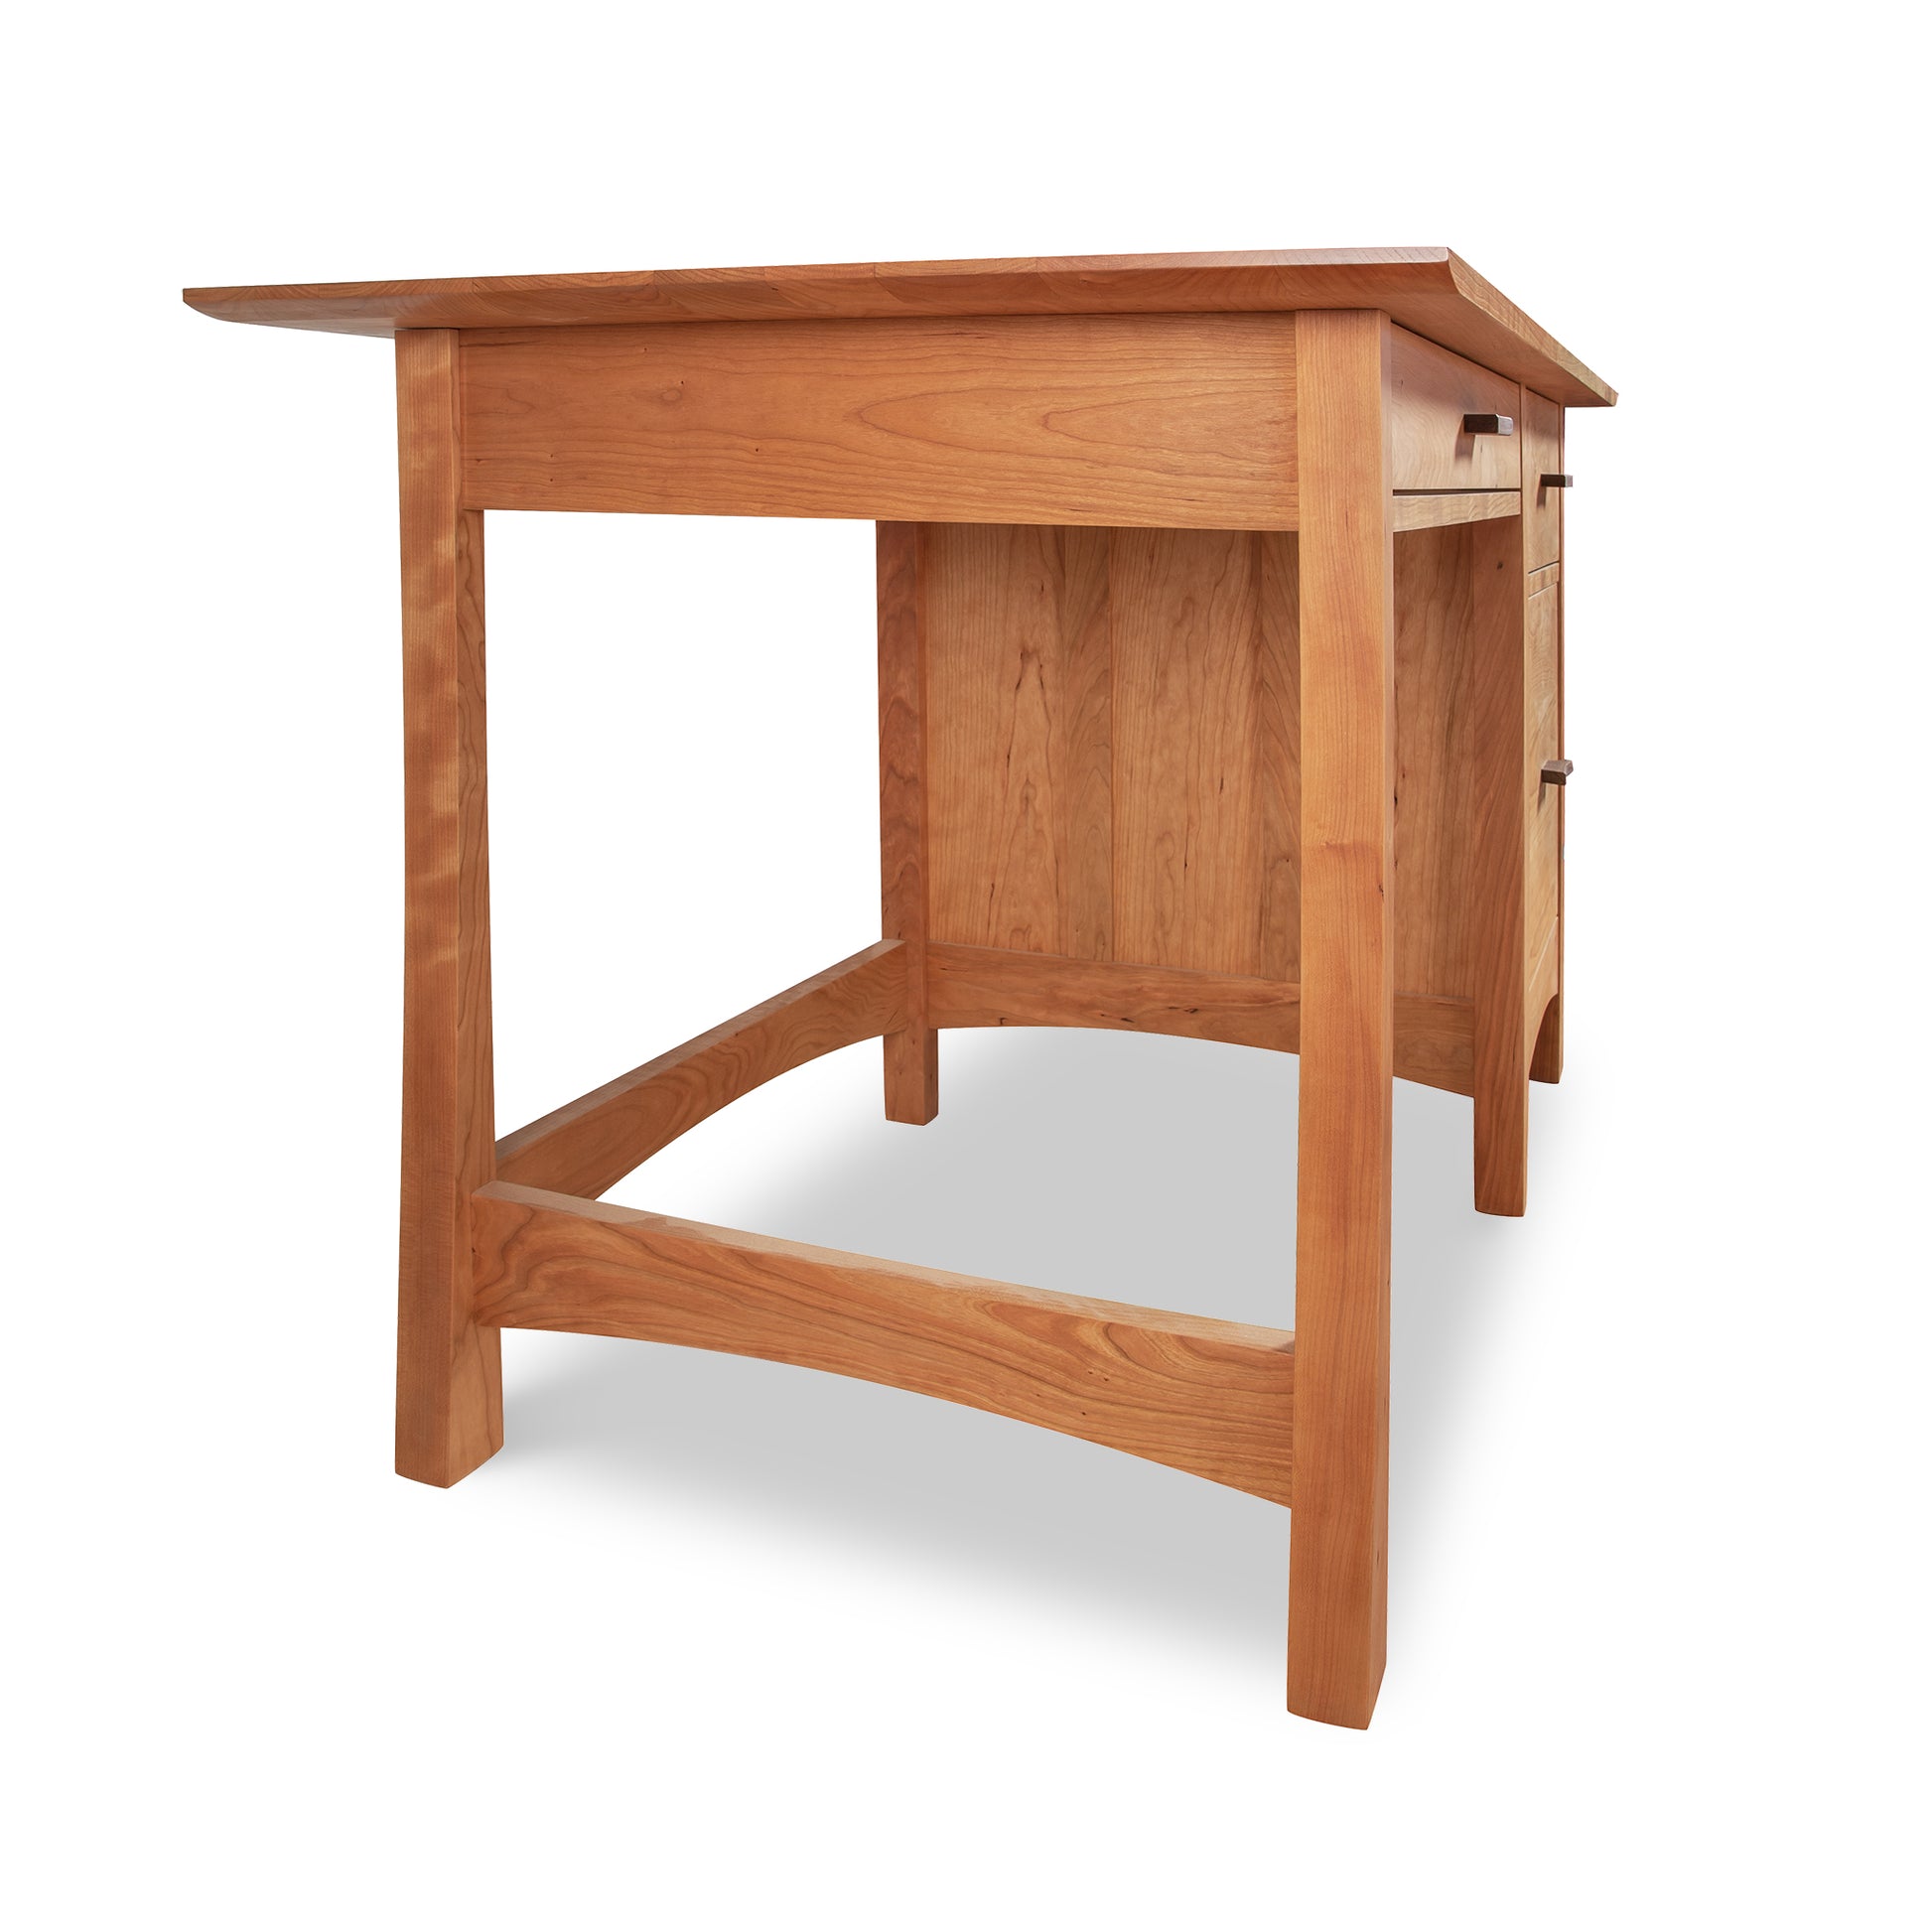 A Vermont Furniture Designs Contemporary Craftsman Study Desk with a drawer on top.